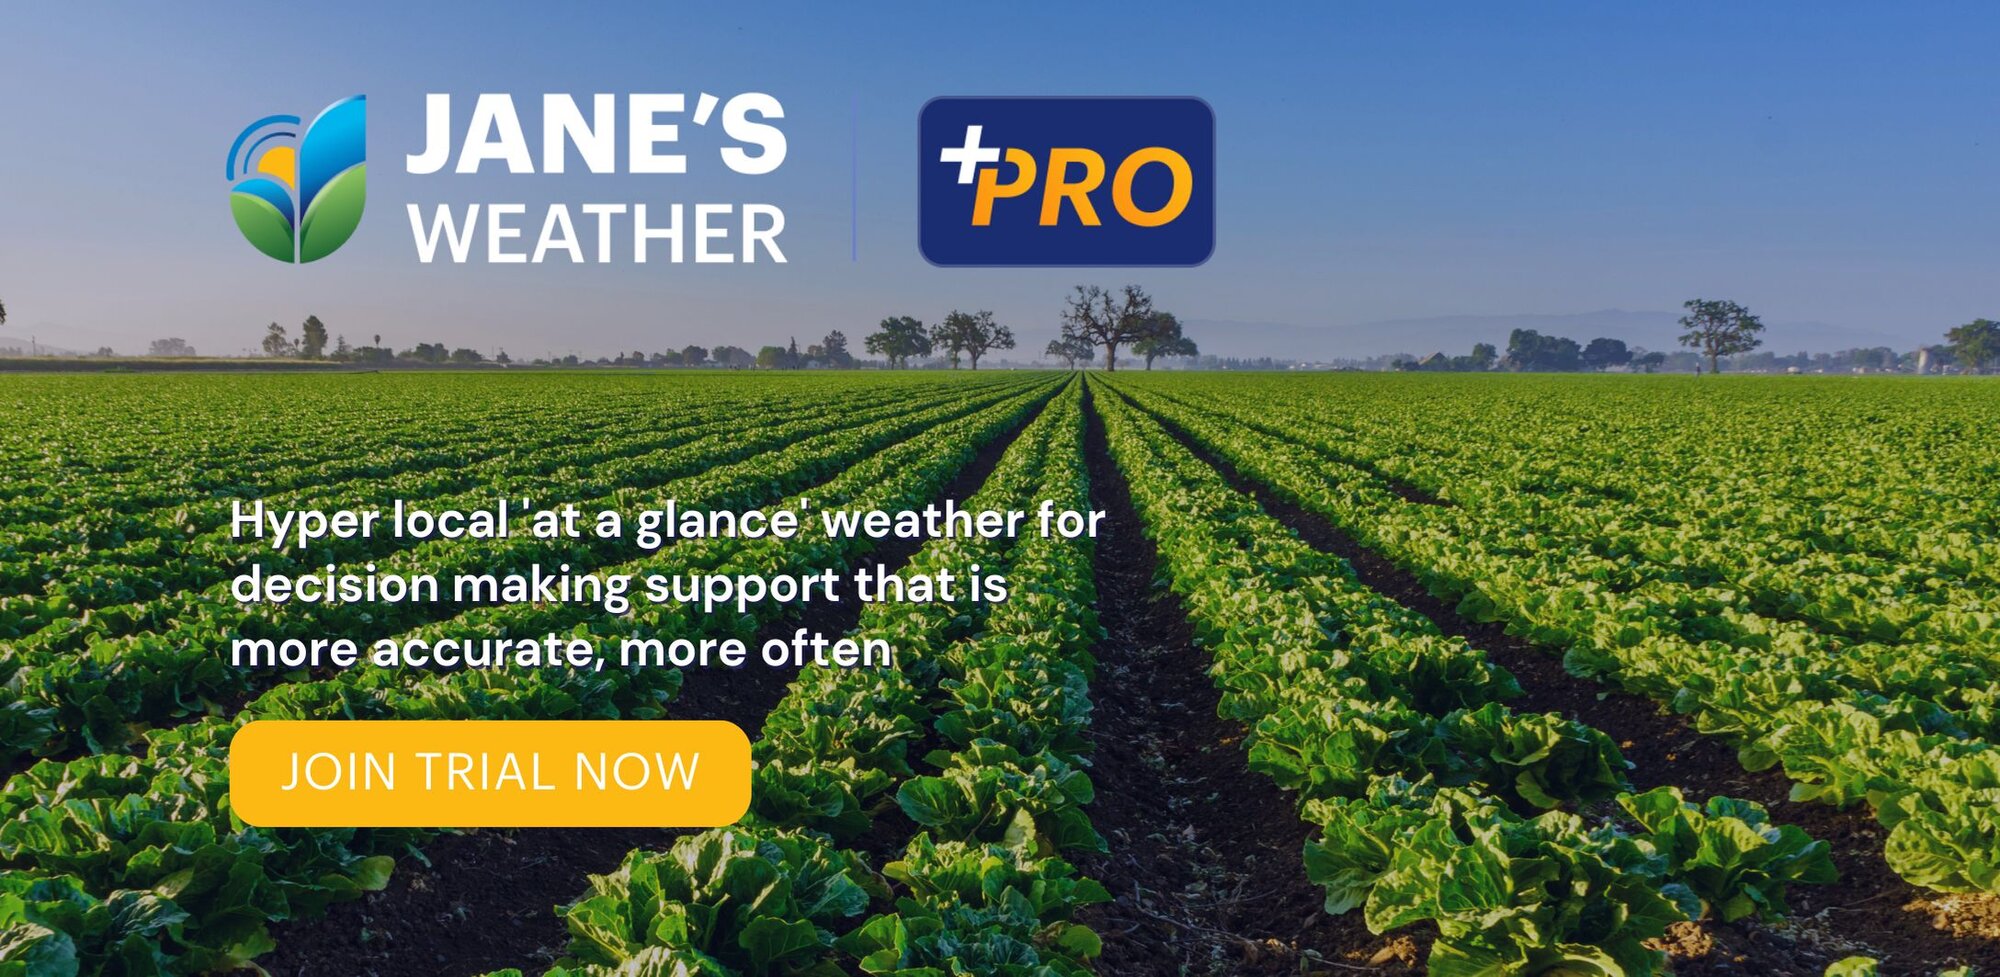 Jane's Weather PRO - join the waitlist, trial now open